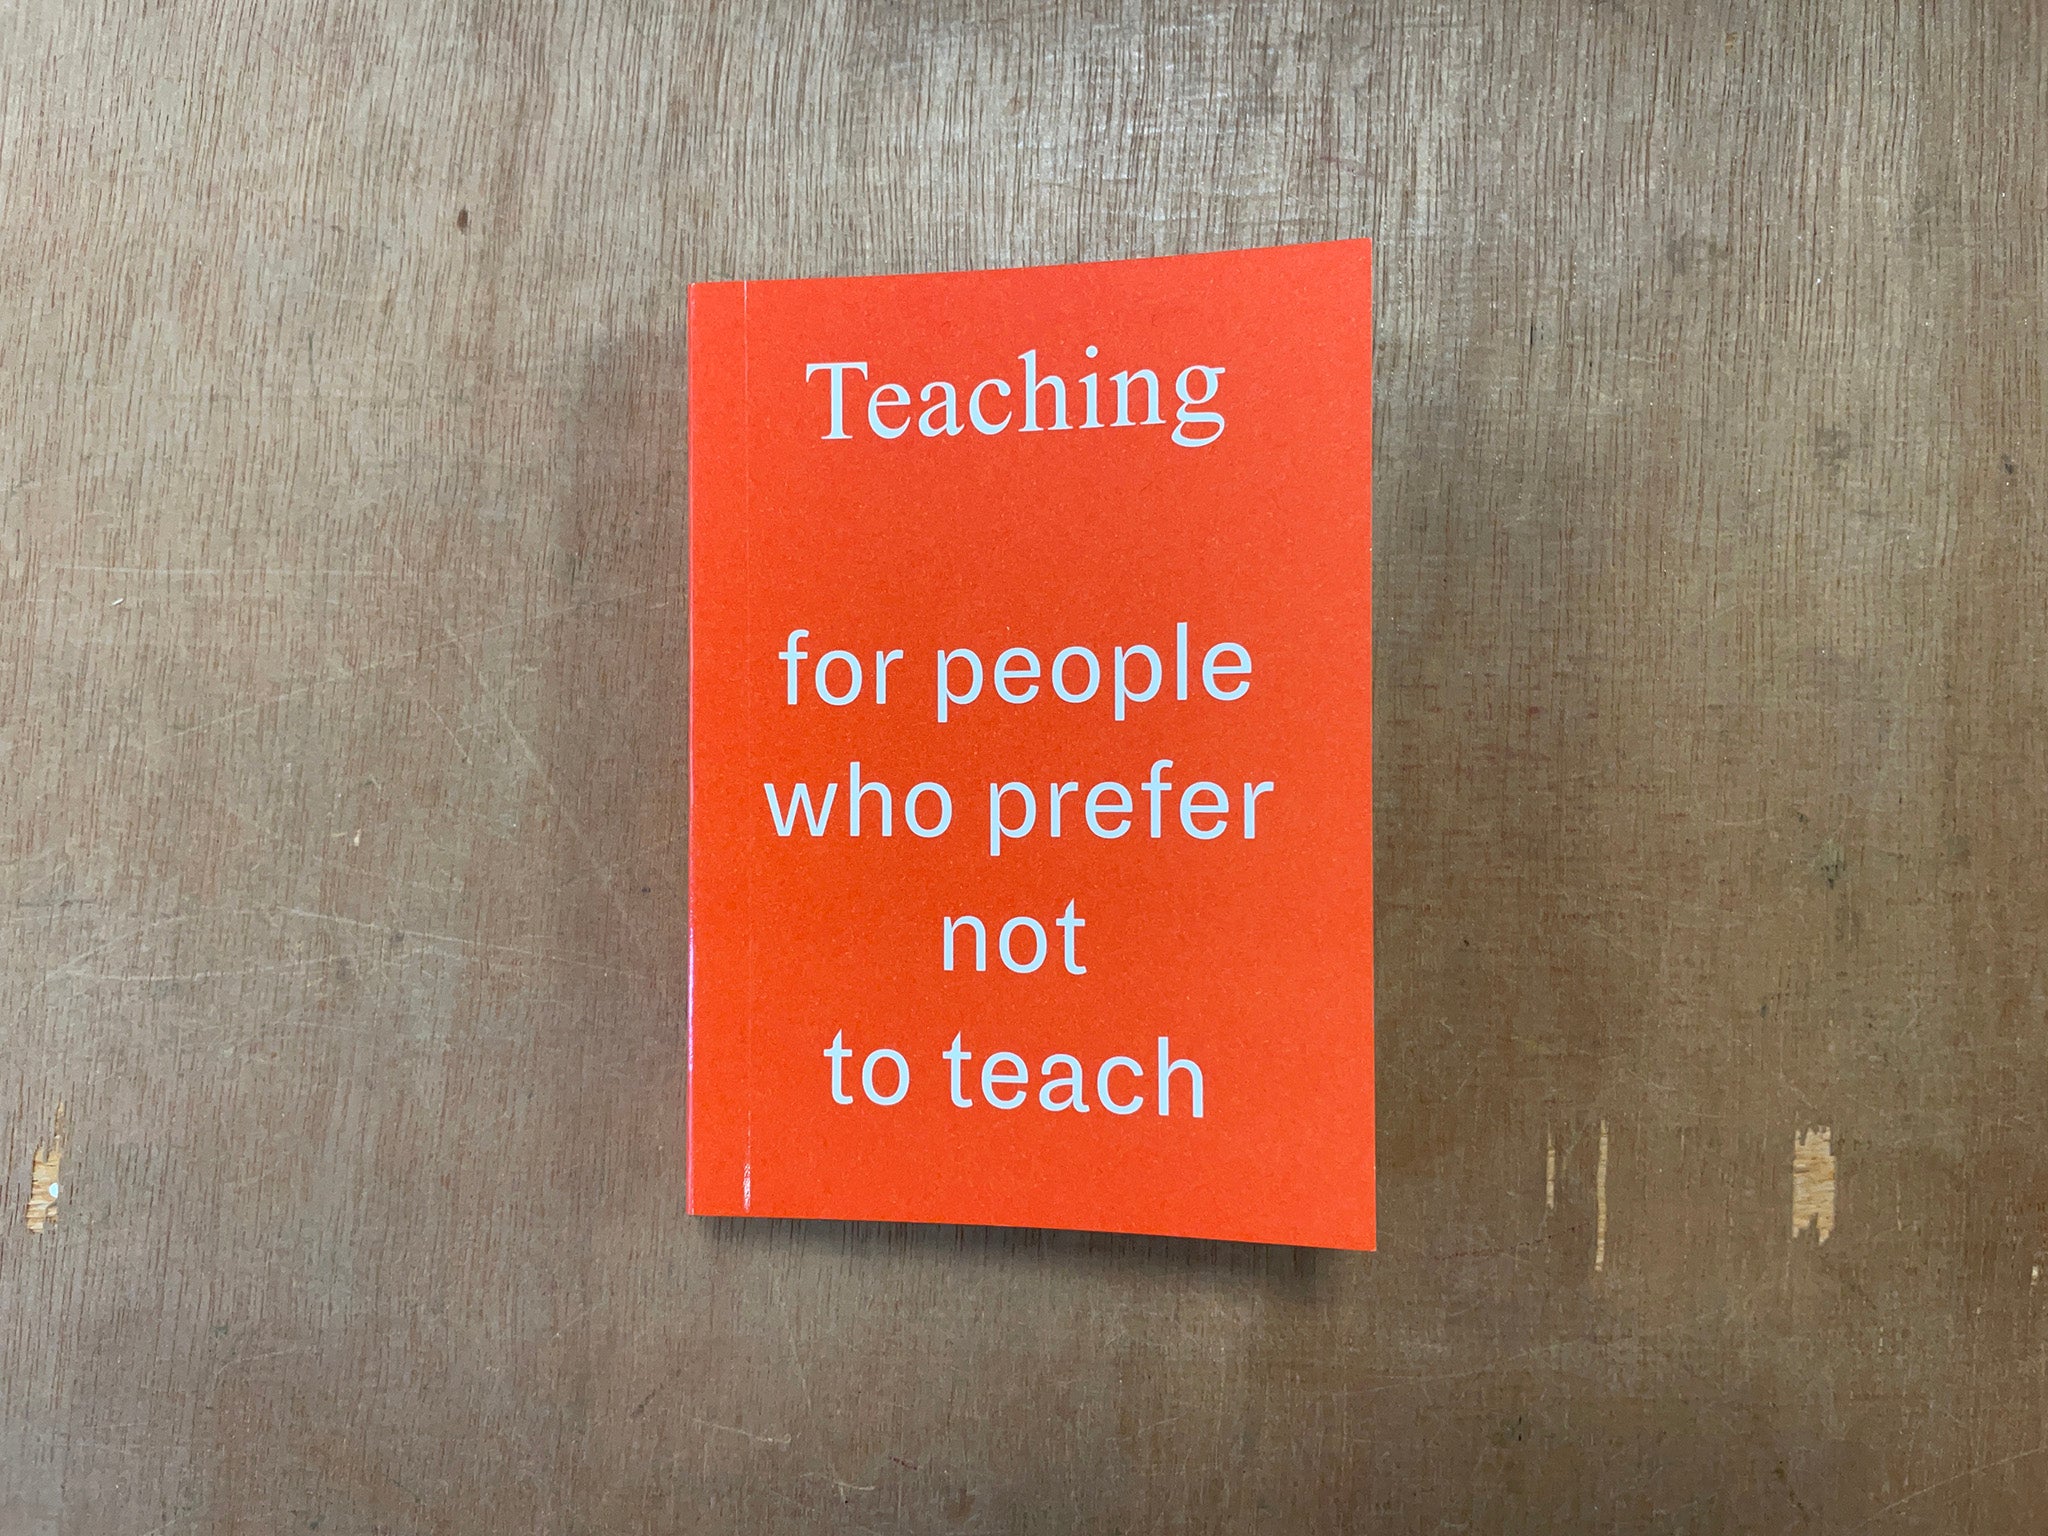 TEACHING FOR PEOPLE WHO PREFER NOT TO TEACH by M Bayerdoerfer and R Schweiker